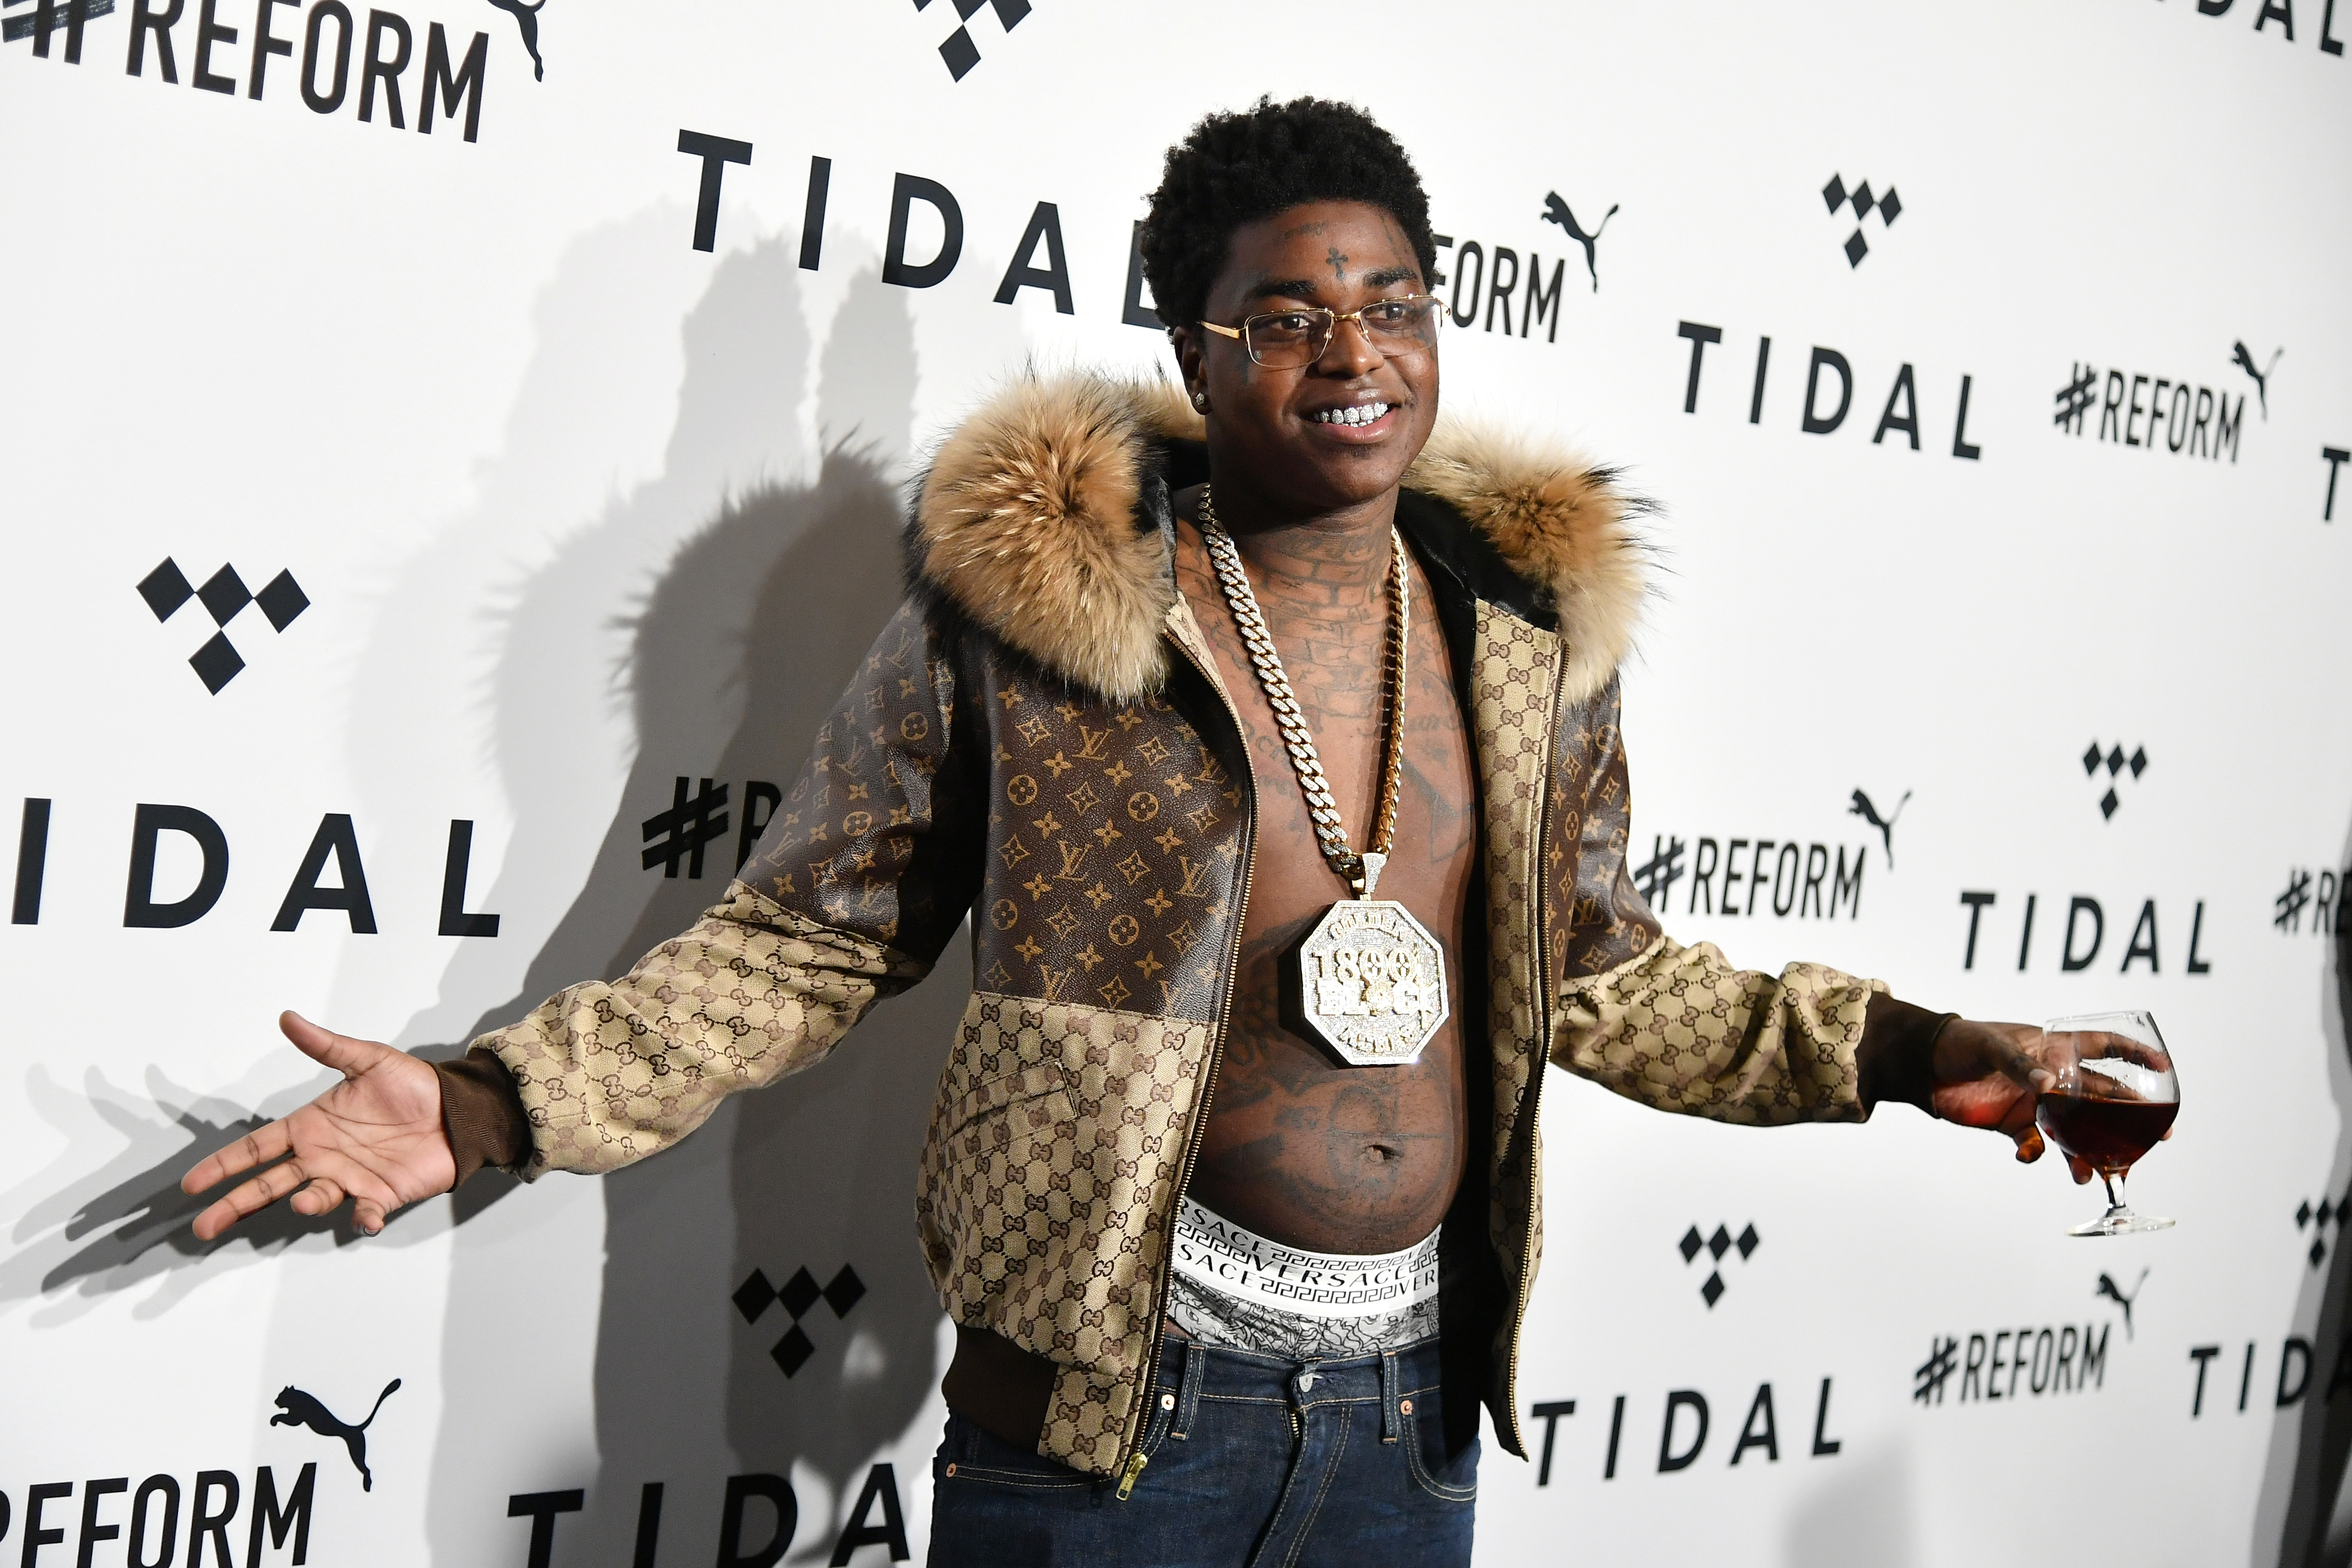 Trap is our culture - Kodak black appearing with some classic clothes🥶🥶